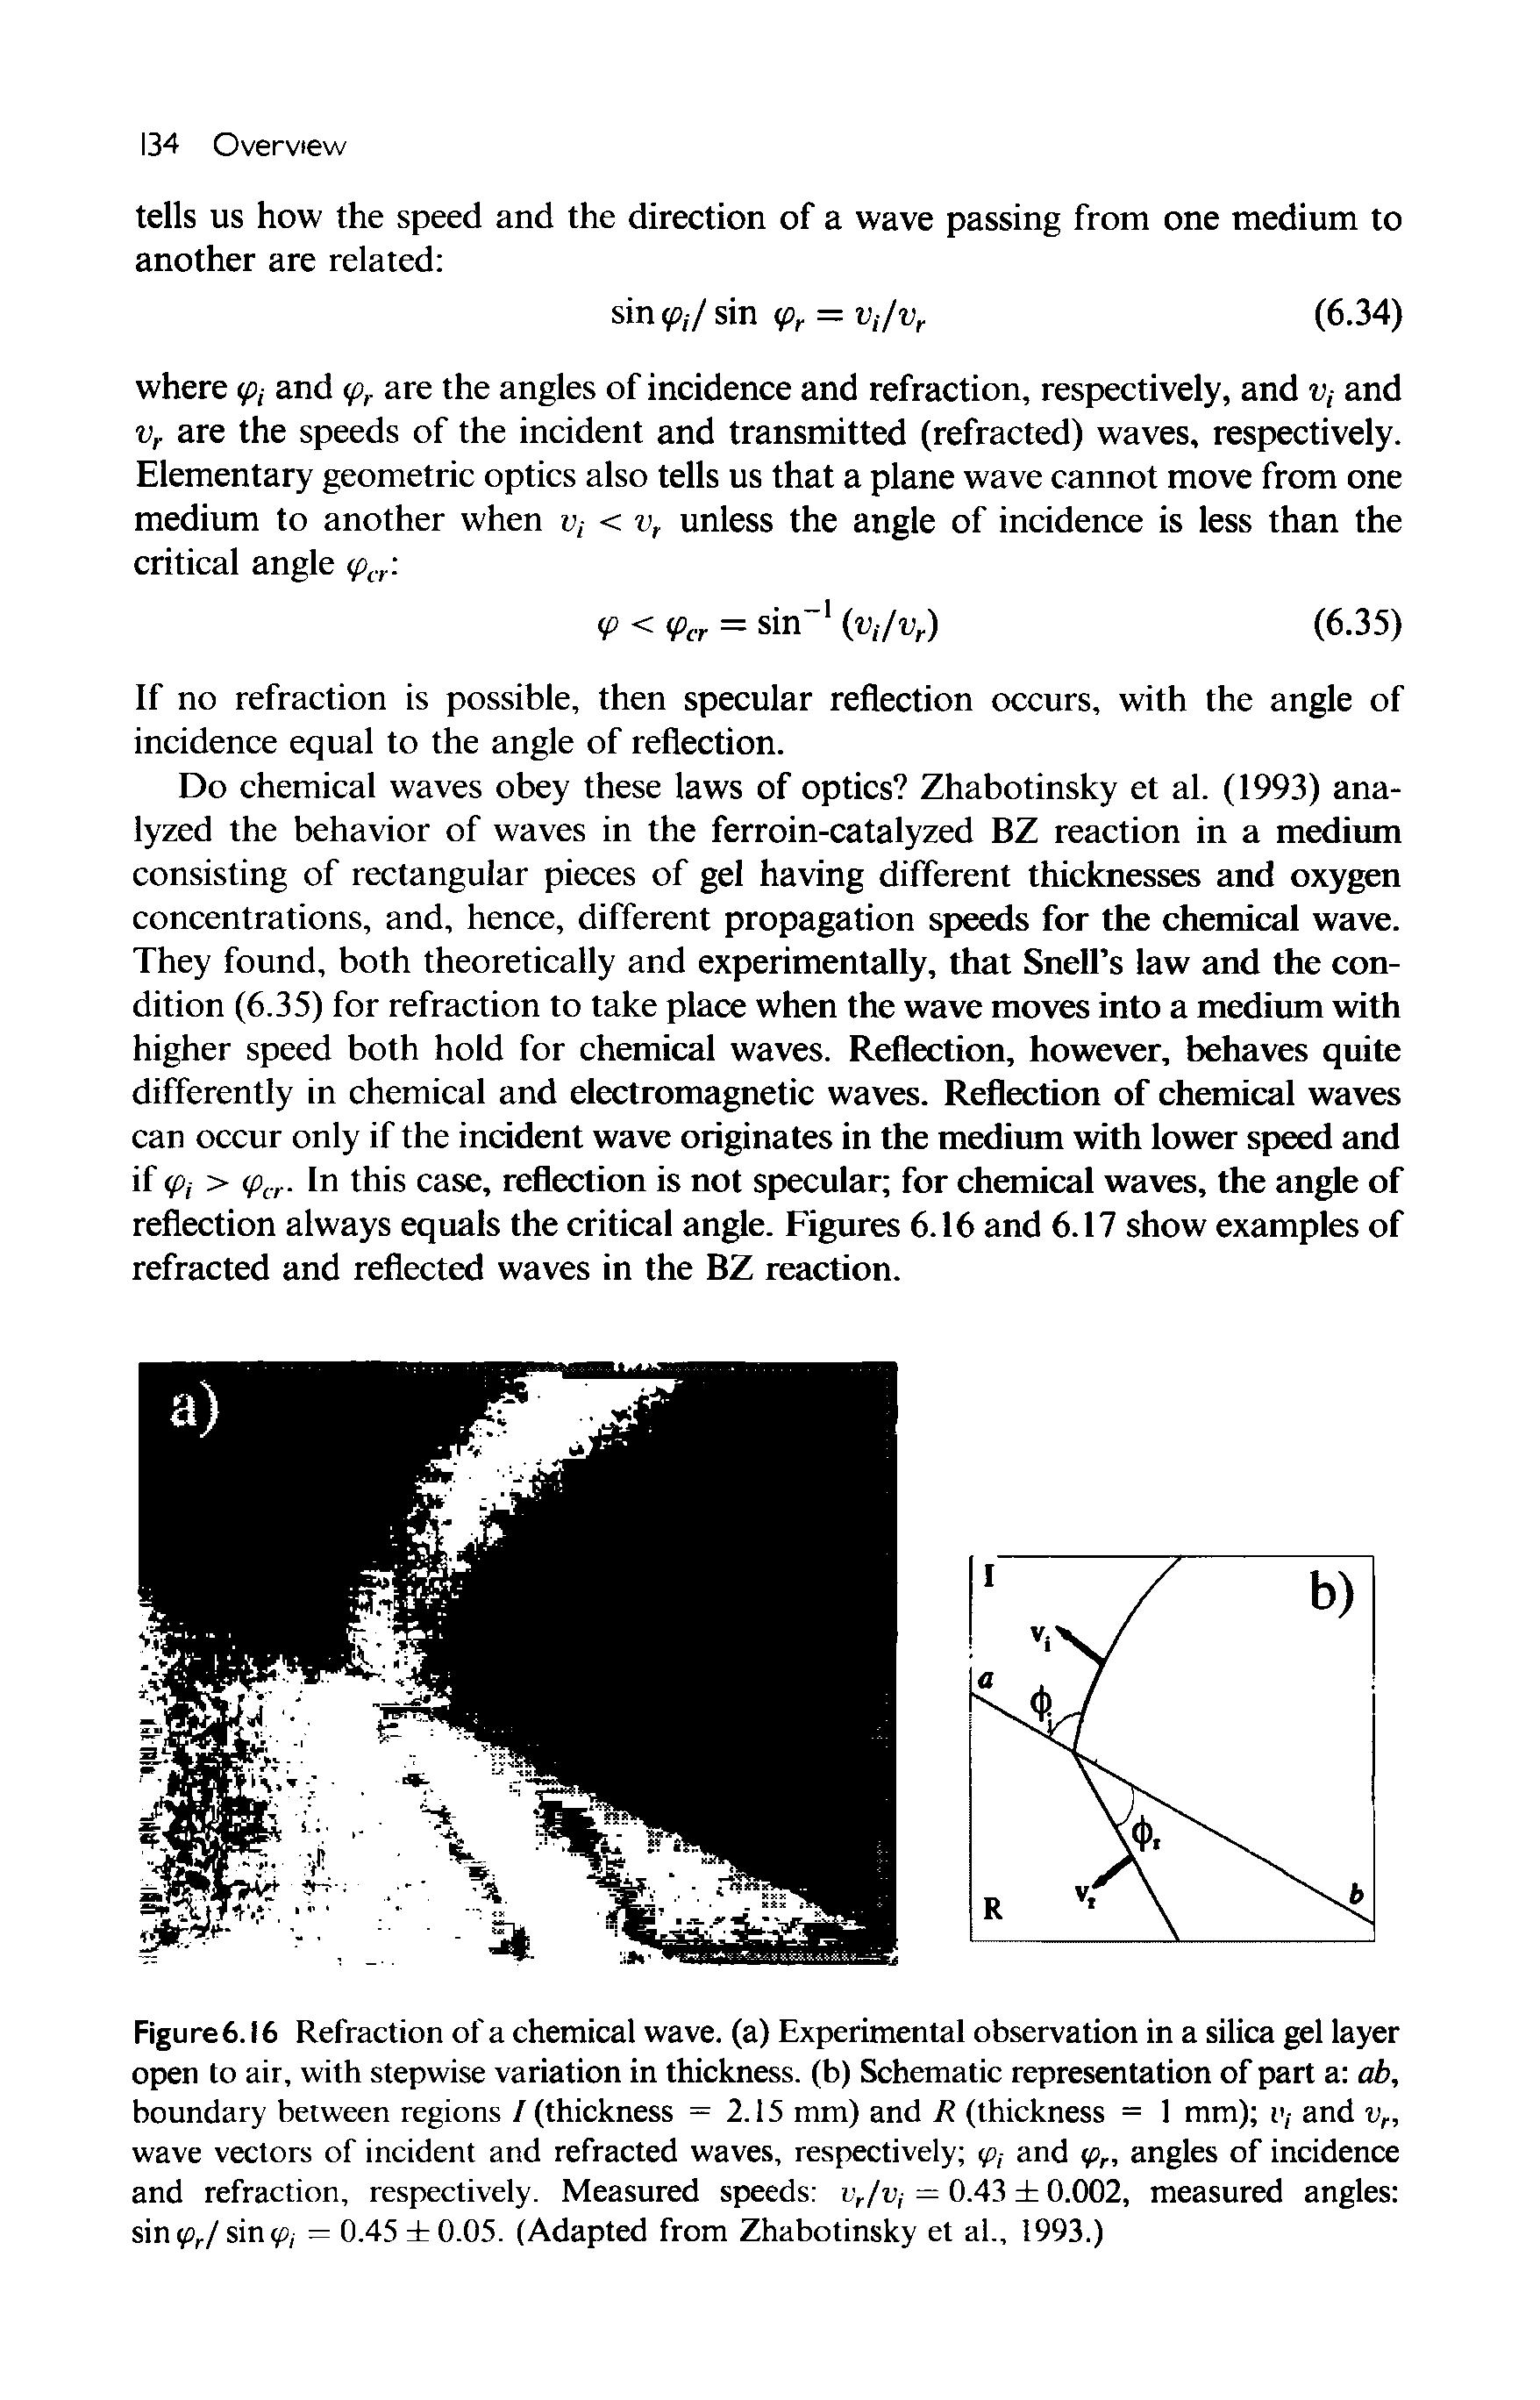 Figure 6.16 Refraction of a chemical wave, (a) Experimental observation in a silica gel layer open to air, with stepwise variation in thickness, (b) Schematic representation of part a ab, boundary between regions / (thickness = 2.15 mm) and R (thickness = 1 mm) i, - and v, wave vectors of incident and refracted waves, respectively <p-, and <Pr, angles of incidence and refraction, respectively. Measured speeds vjvt = 0.43 0.002, measured angles sin r/siriyj, = 0.45 0.05. (Adapted from Zhabotinsky et al., 1993.)...